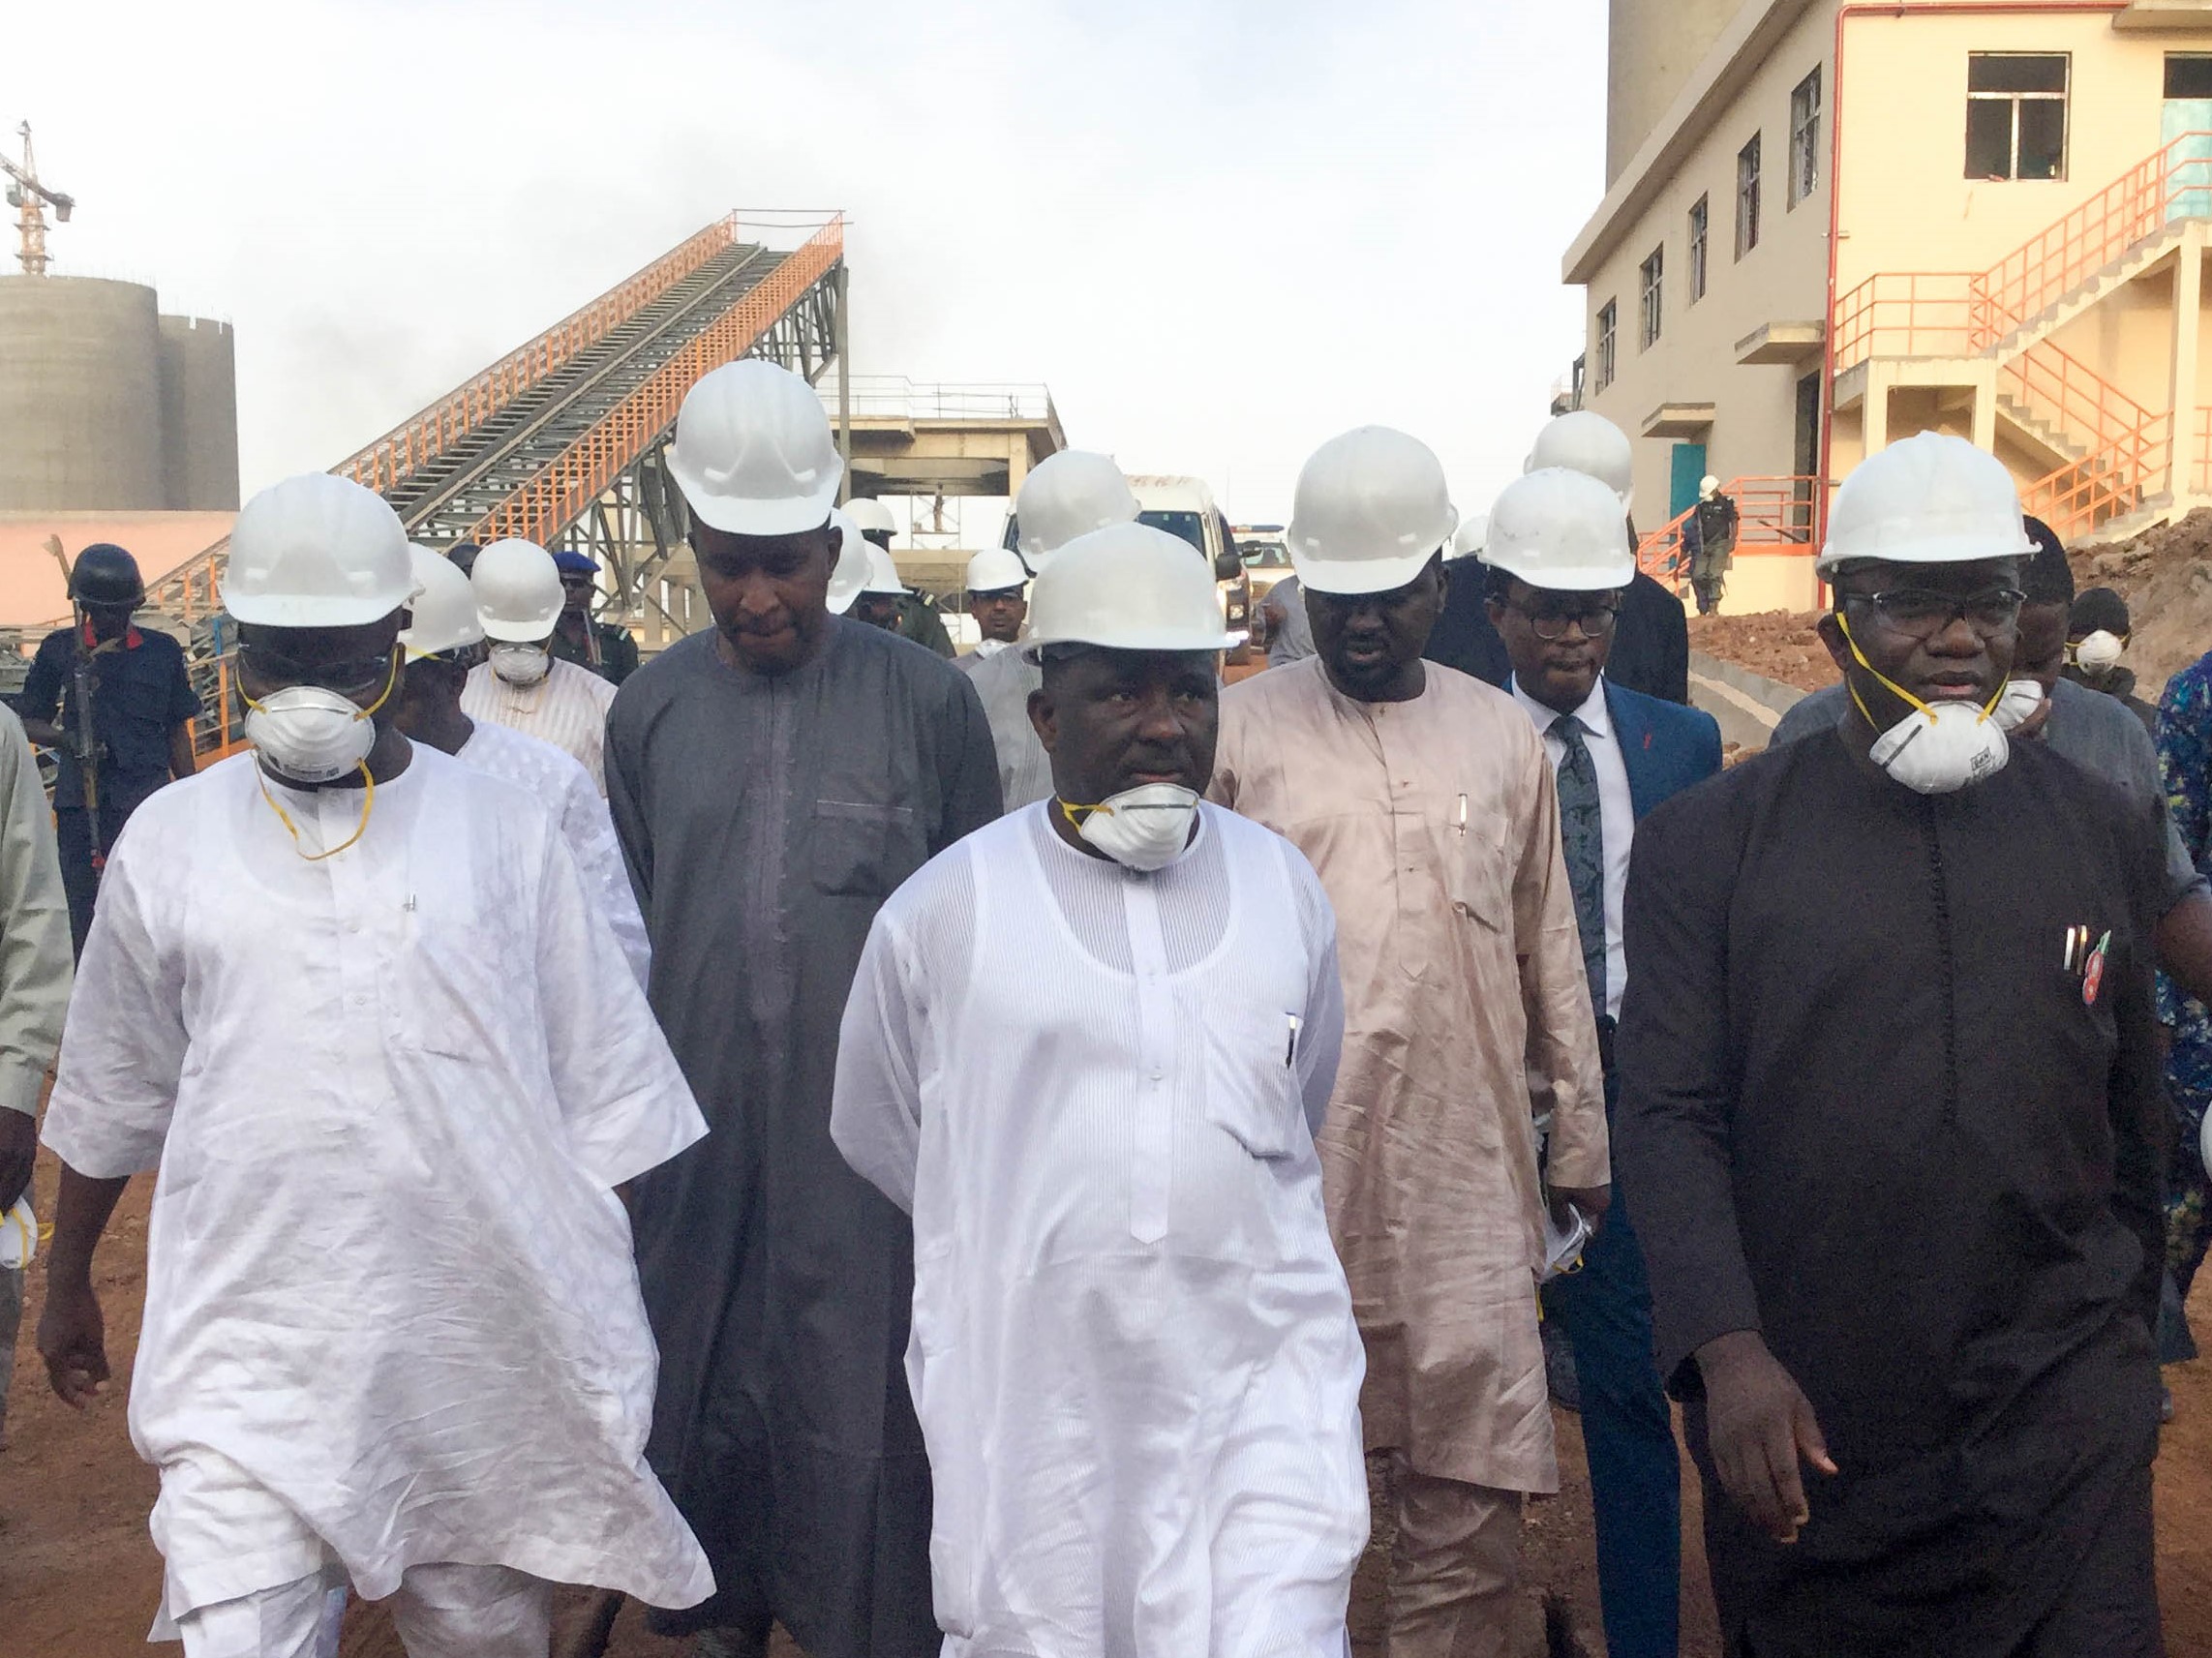 L – R: Abubakar Bawa Bwari, Hon. Minister of State for Solid Minerals Development;  Ibrahim Aminu, Managing Director, CCNN Plc; Kabiru Rabiu, Group Executive Director, BUA Group; Abdulsamad Rabiu, Executive Chairman, BUA Group & Chairman CCNN PLC; Dr. Kayode Fayemi, Hon. Minister for Solid Minerals Development during a high-level working visit to BUA Group’s Cement Subsidiary, CCNN Sokoto Cement plant yesterday